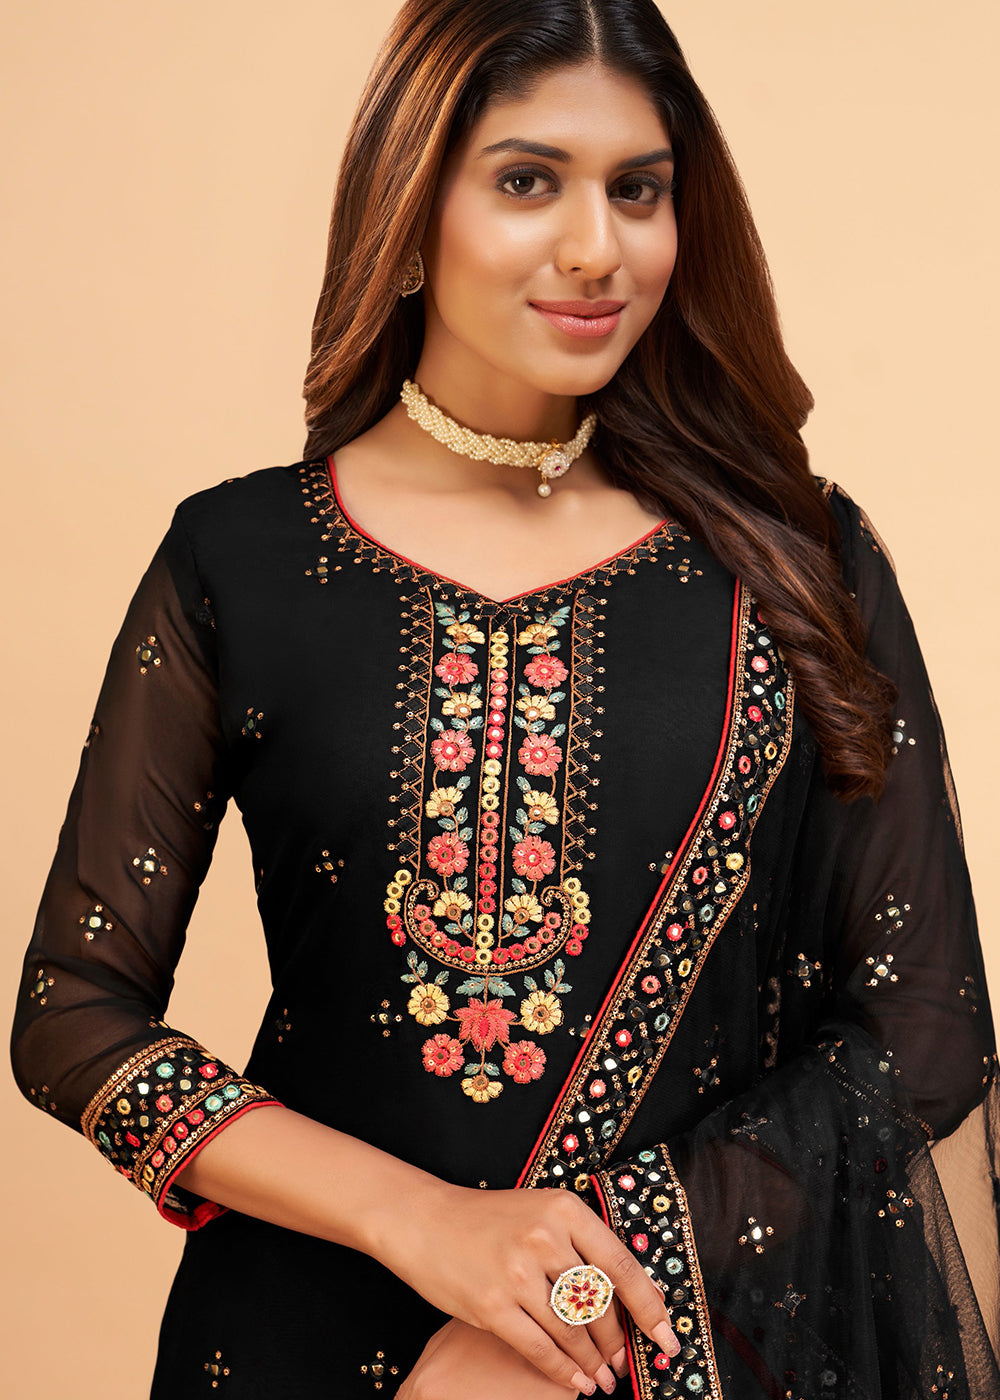 Shop Now Dazzling Black Wedding Embroidered Sharara Suit Online at Empress Clothing in USA, UK, Canada, Germany & Worldwide.